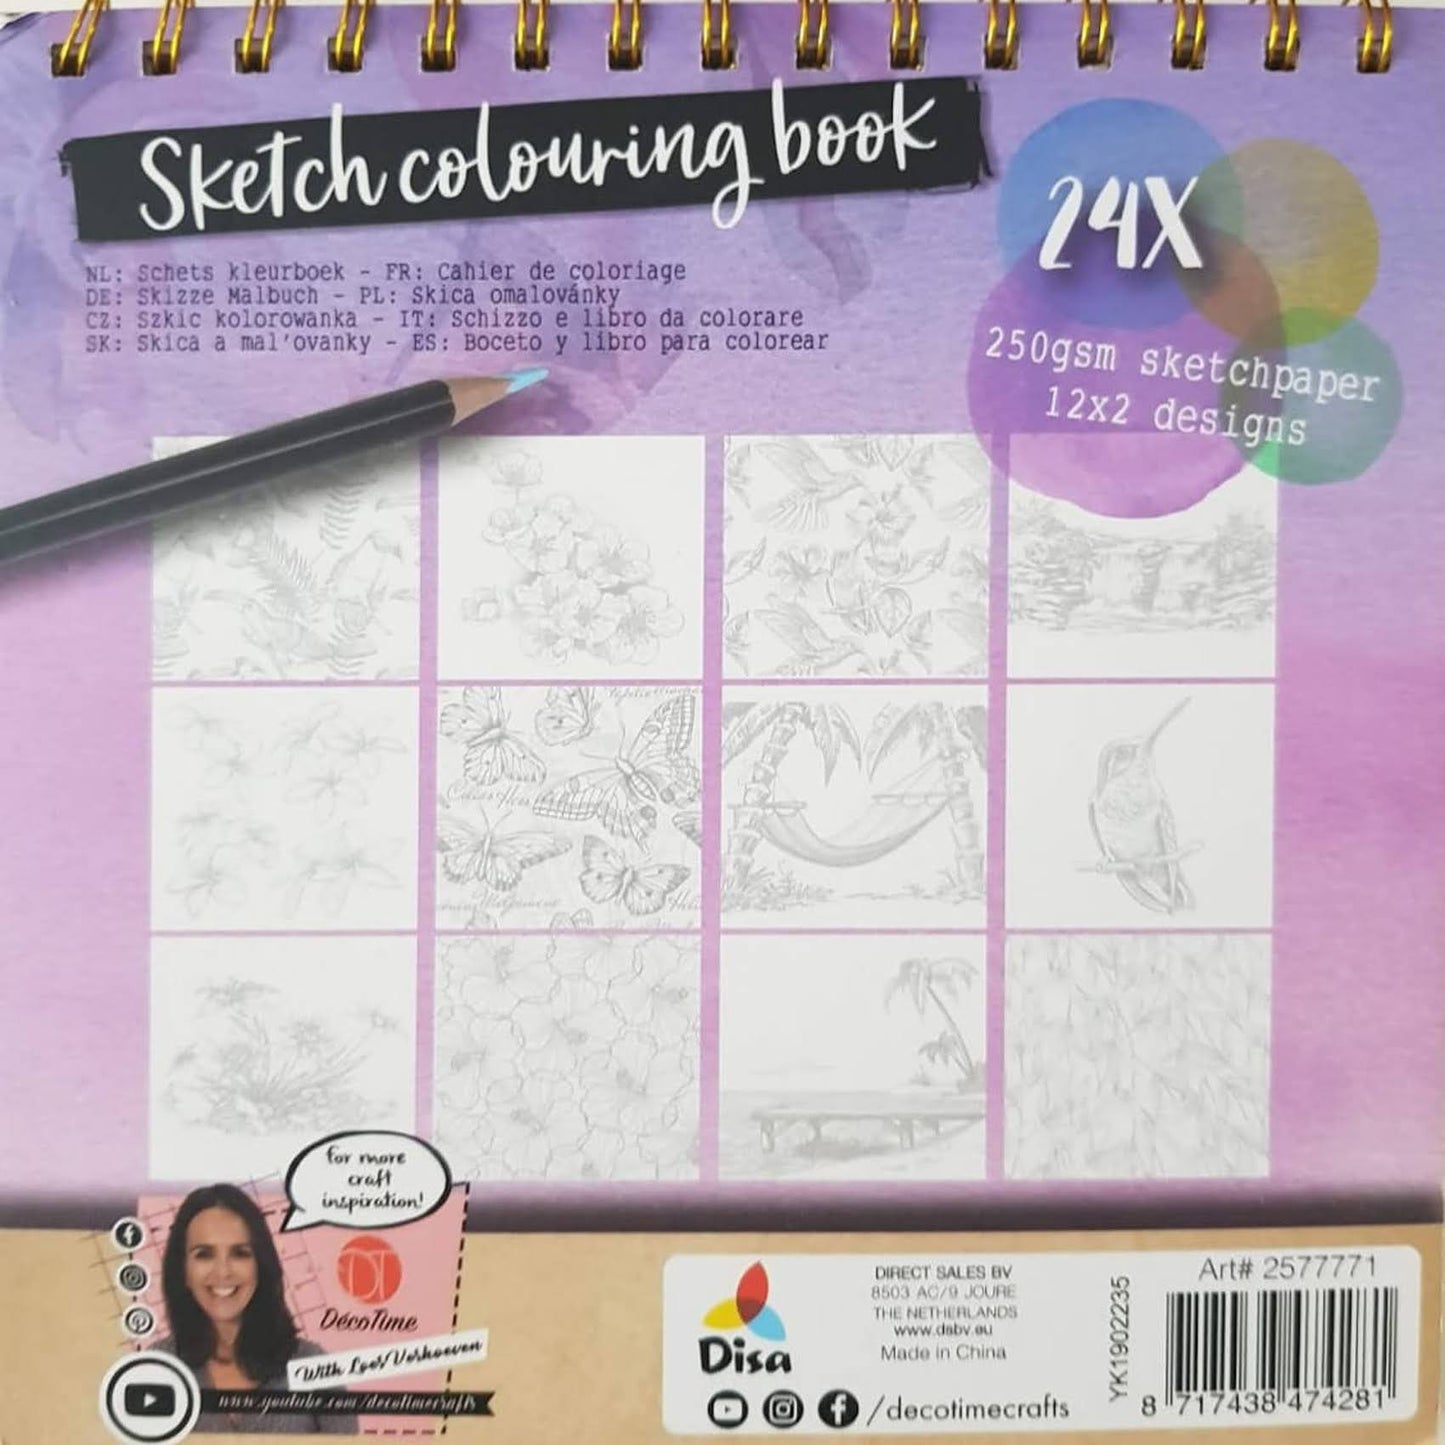 Sketch Colouring Book Like New Recuddles.ch  (6250210721977)